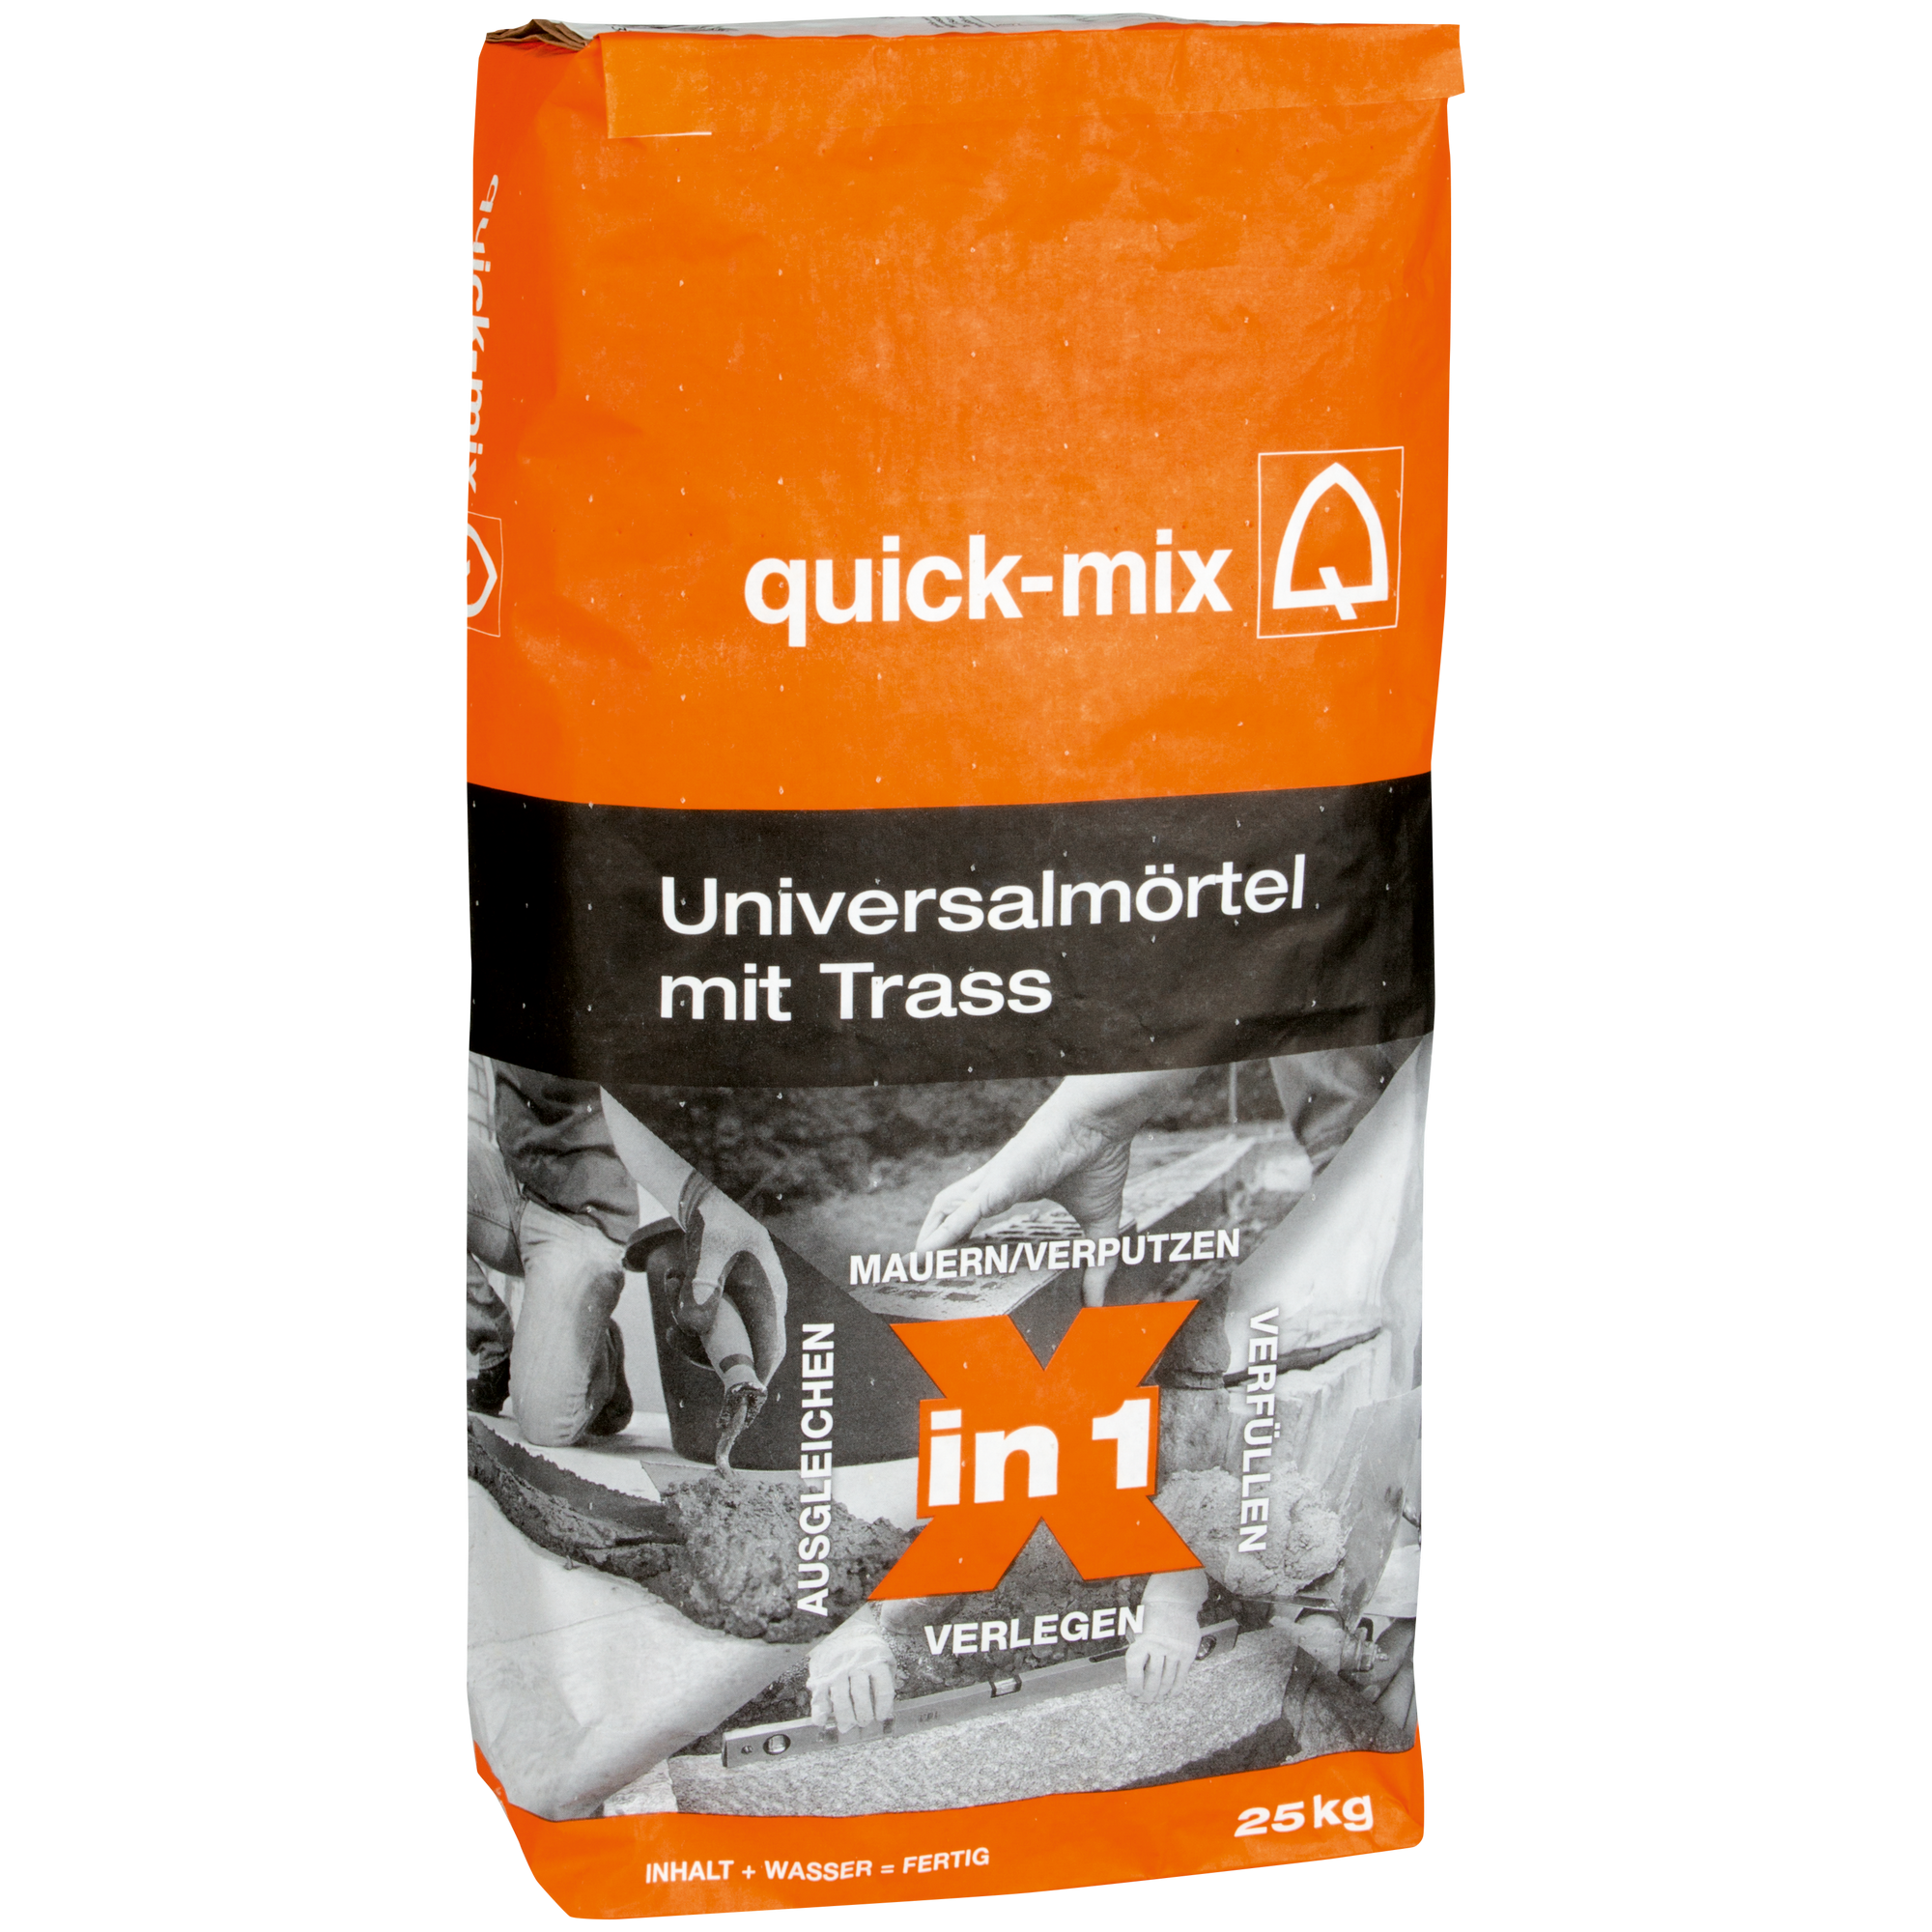 Universalmörtel 'X in 1' 25 kg + product picture